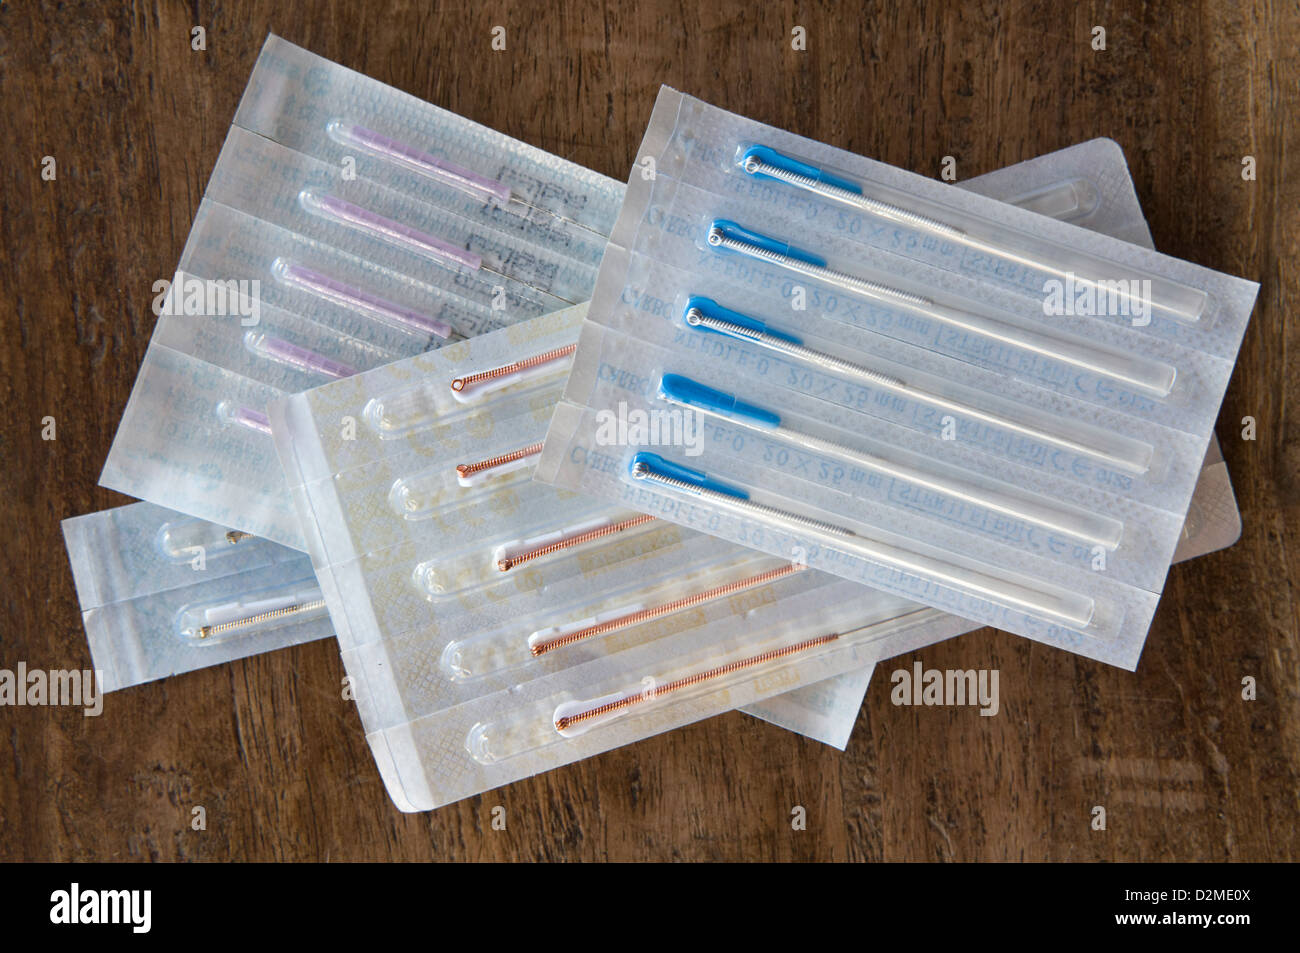 Assortment of different sized sealed acupuncture needles in packets taken on a wooden table Stock Photo